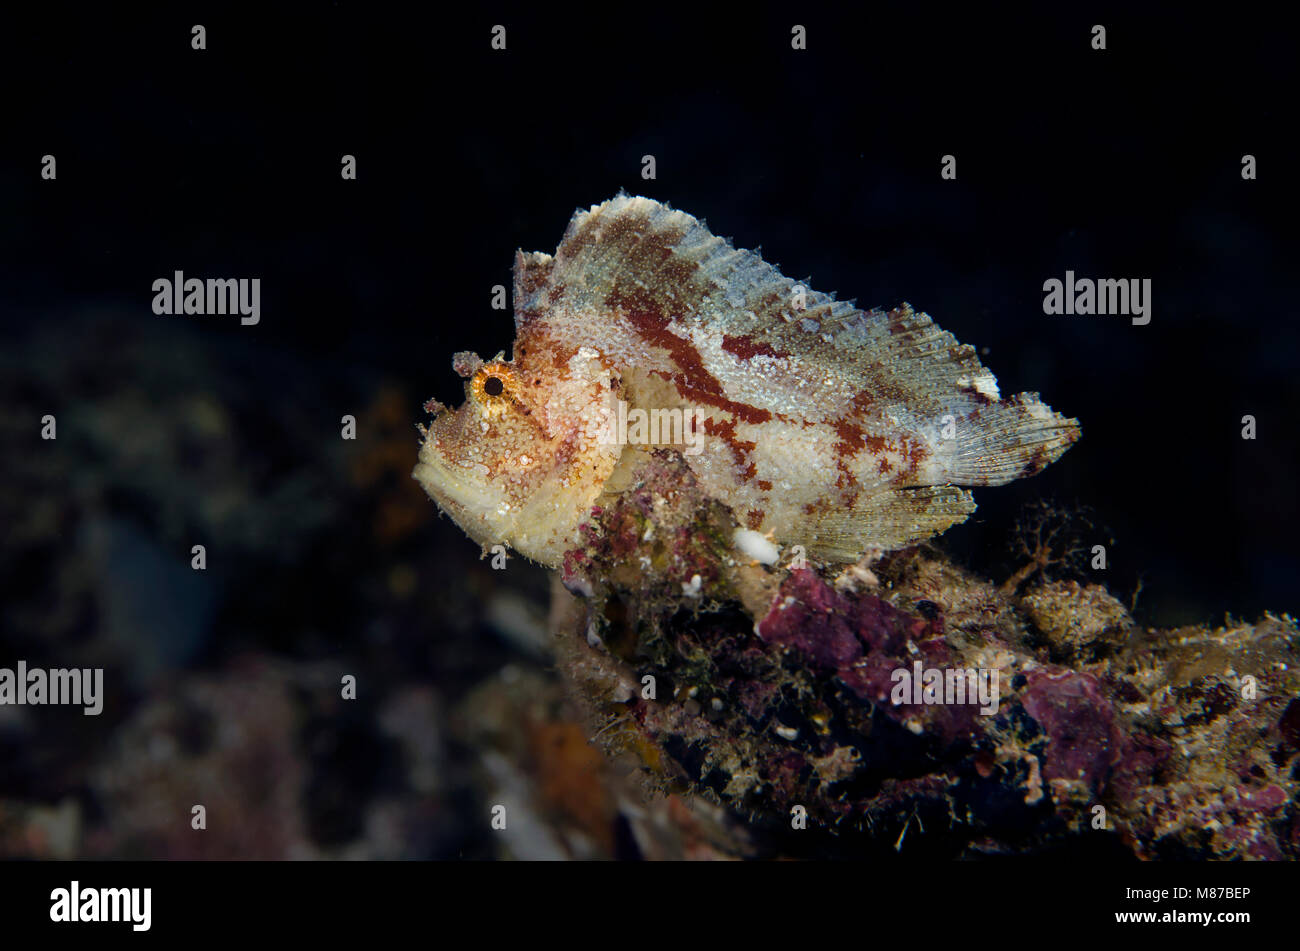 Leaf Scorpionfish, Taenianotus Triacanthus, on coral, in Maldives Stock Photo